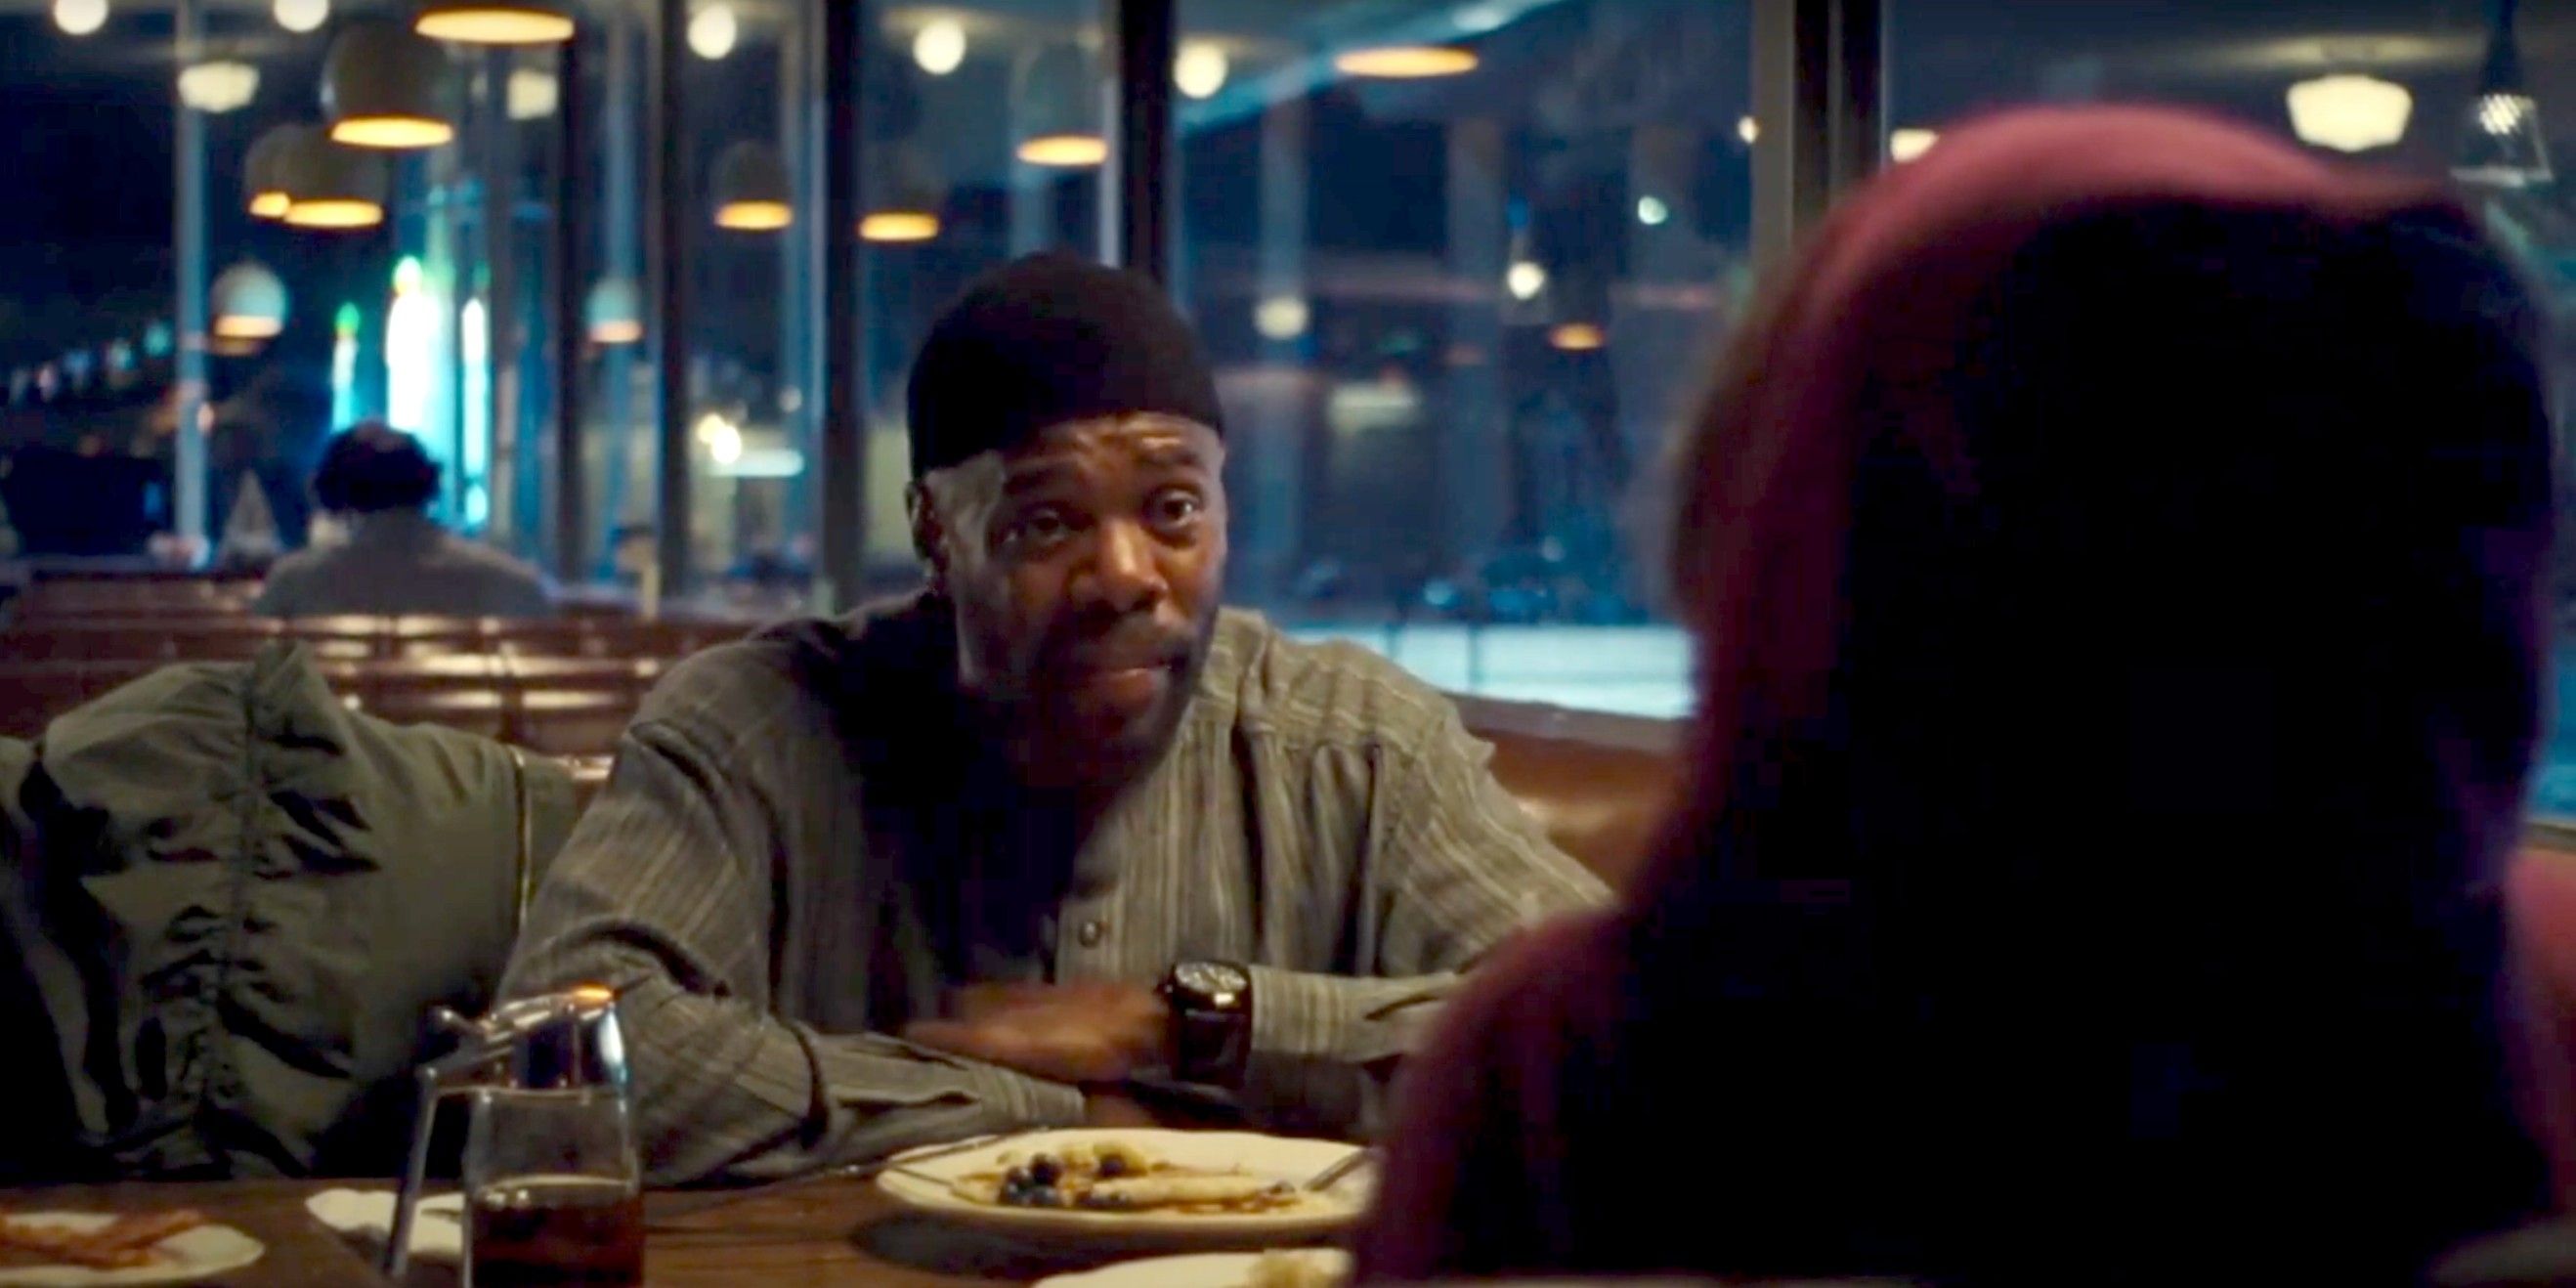 Ali and Rue talk in a diner on Euphoria